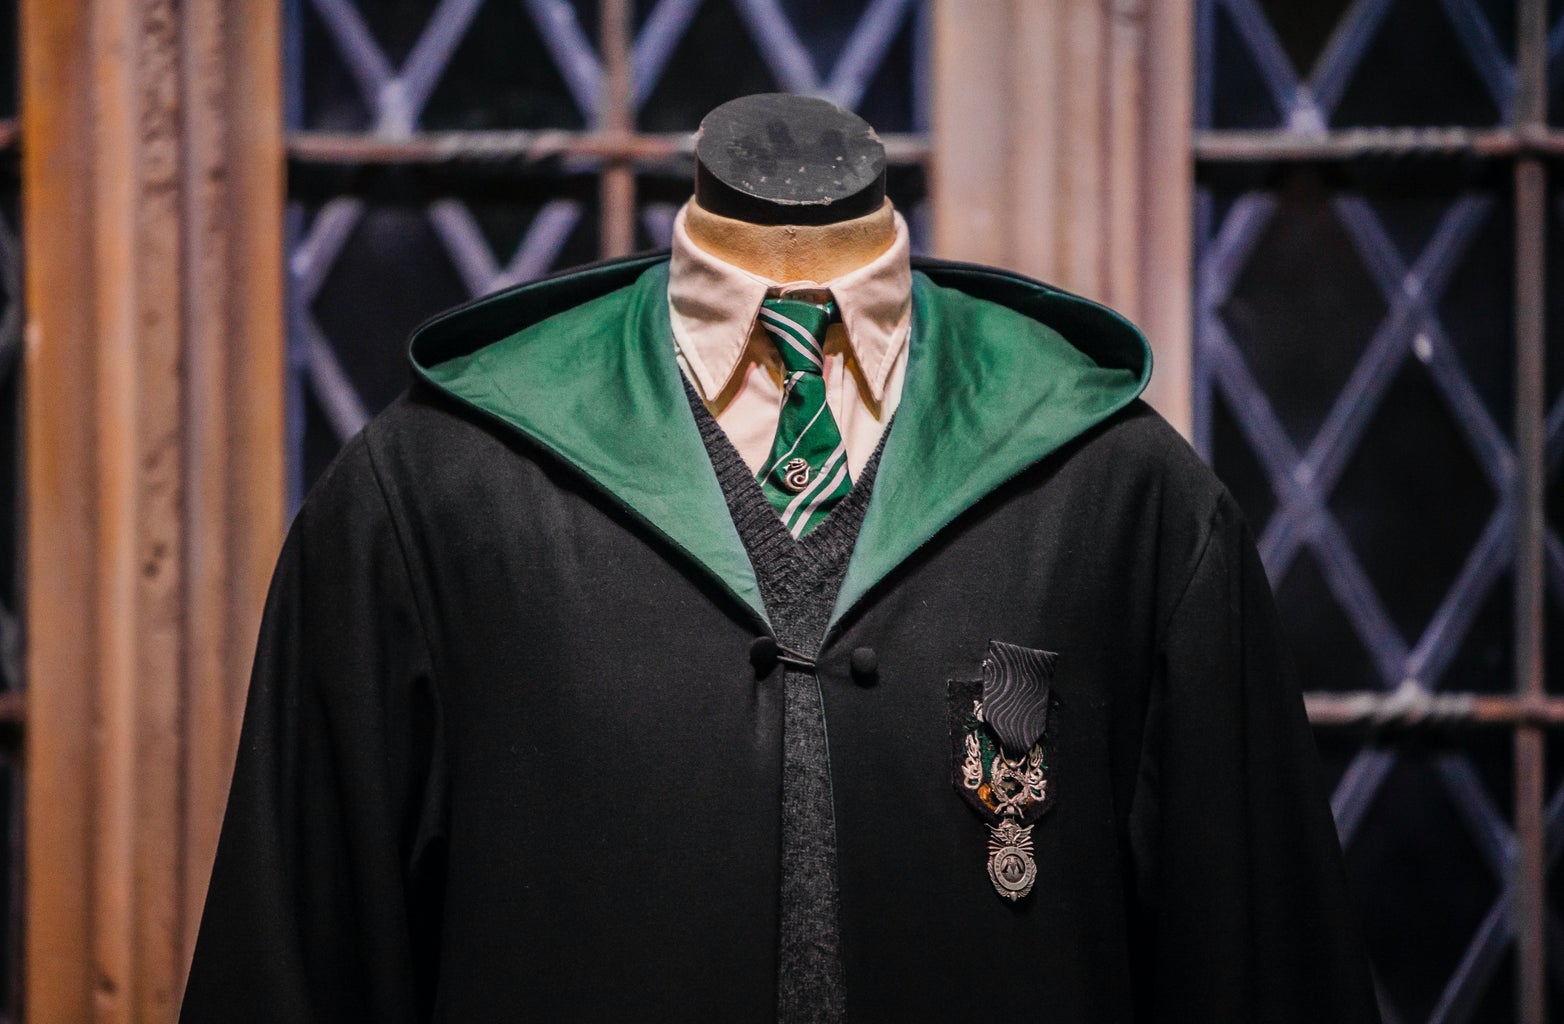 Slytherin, harry potter, robe with tie